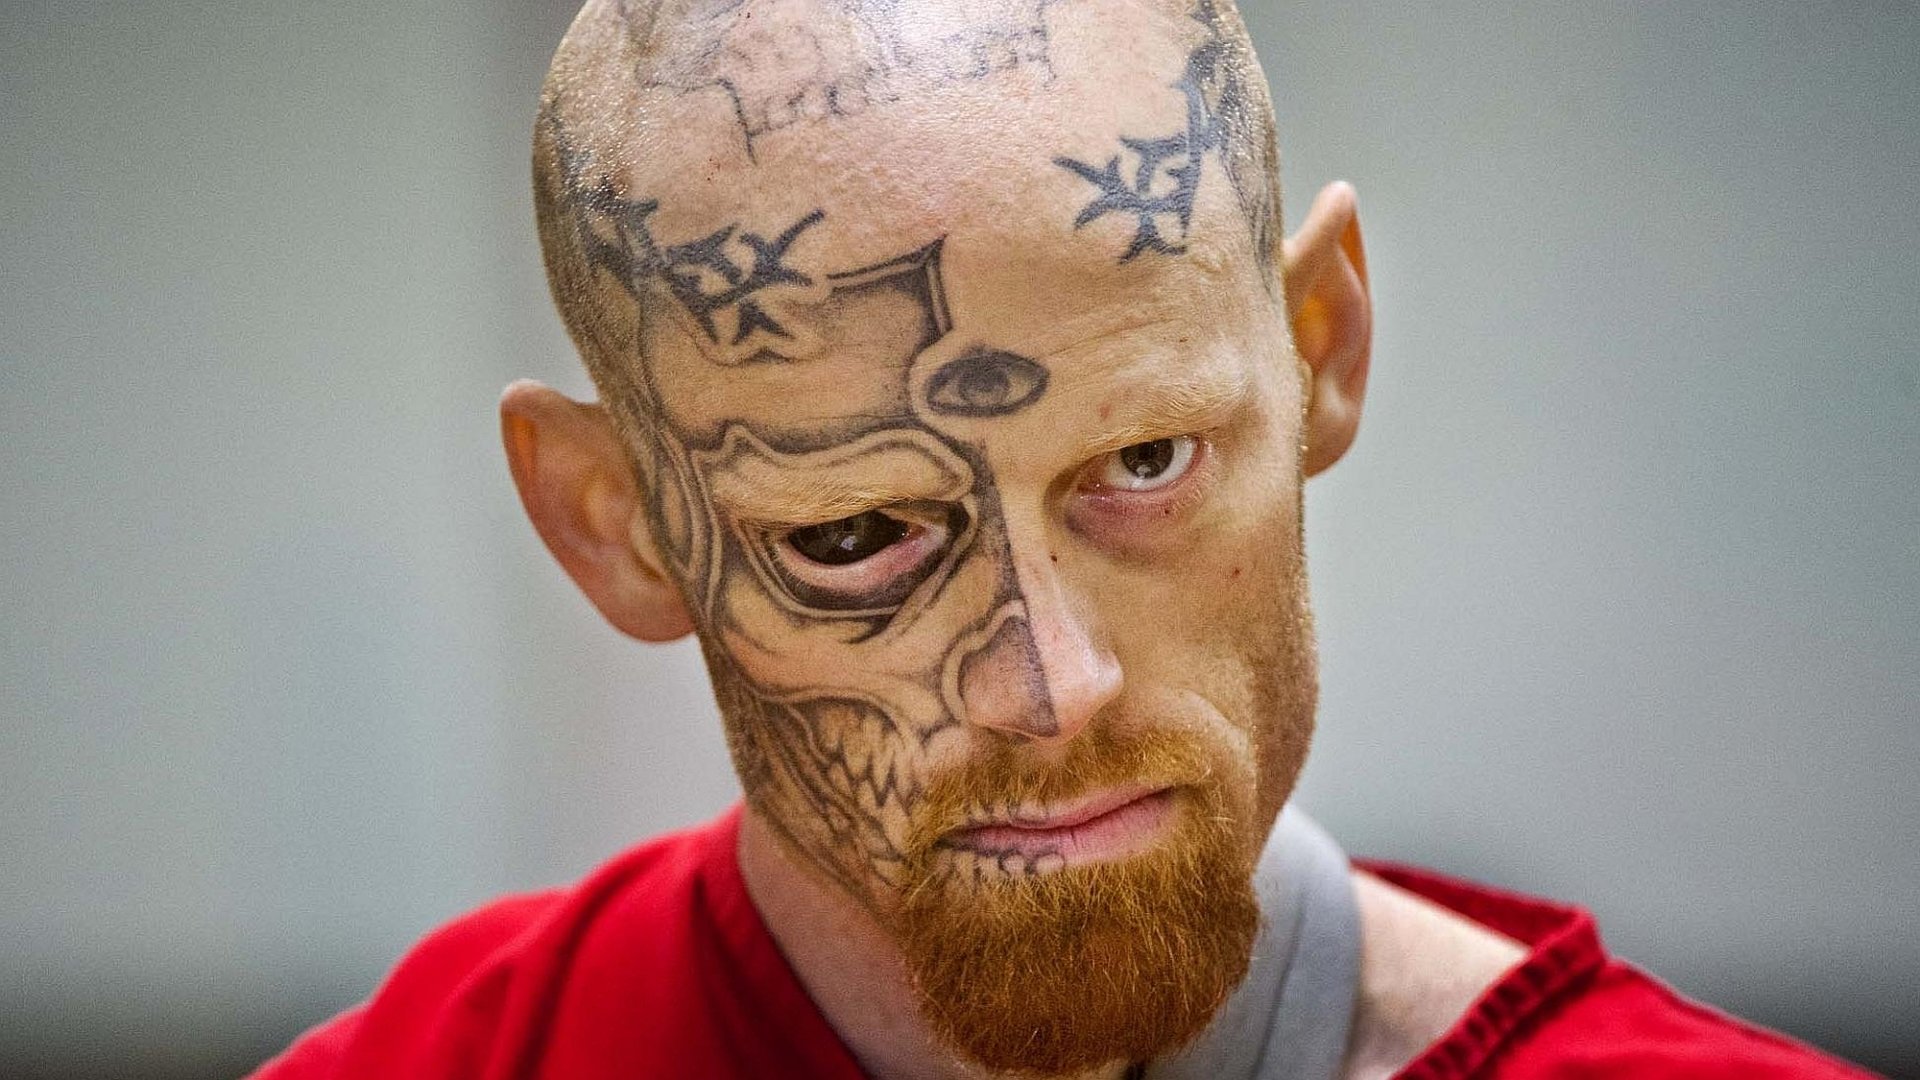 Jason Barnum looked ferociously at the camera with a tattooed part of his face and on his right eye